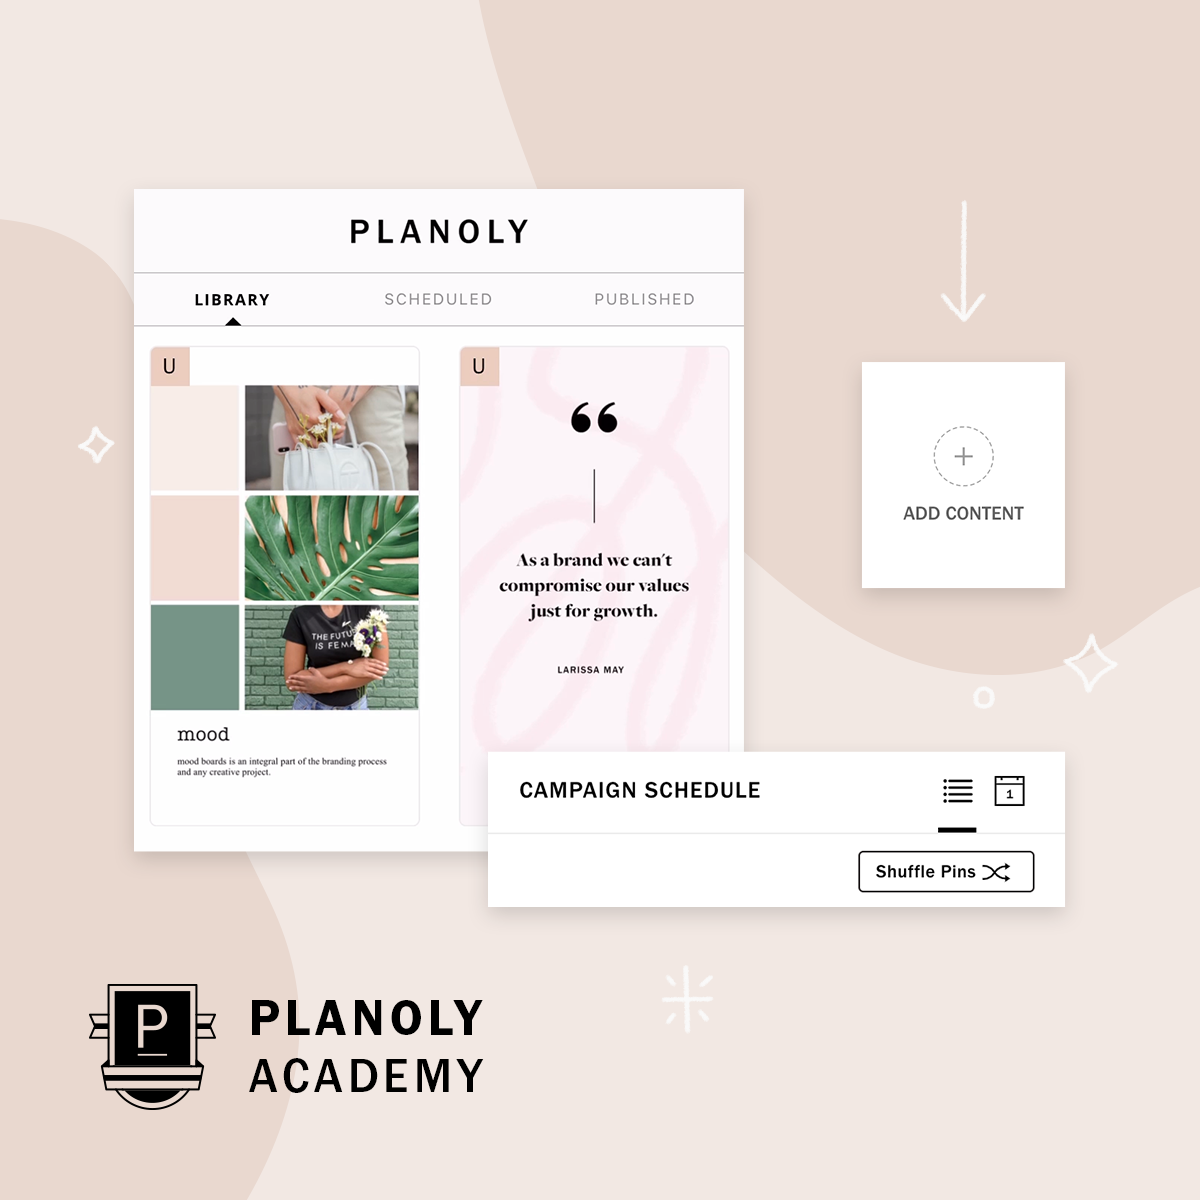 PLANOLY Academy - Landing Page - Pin Planner